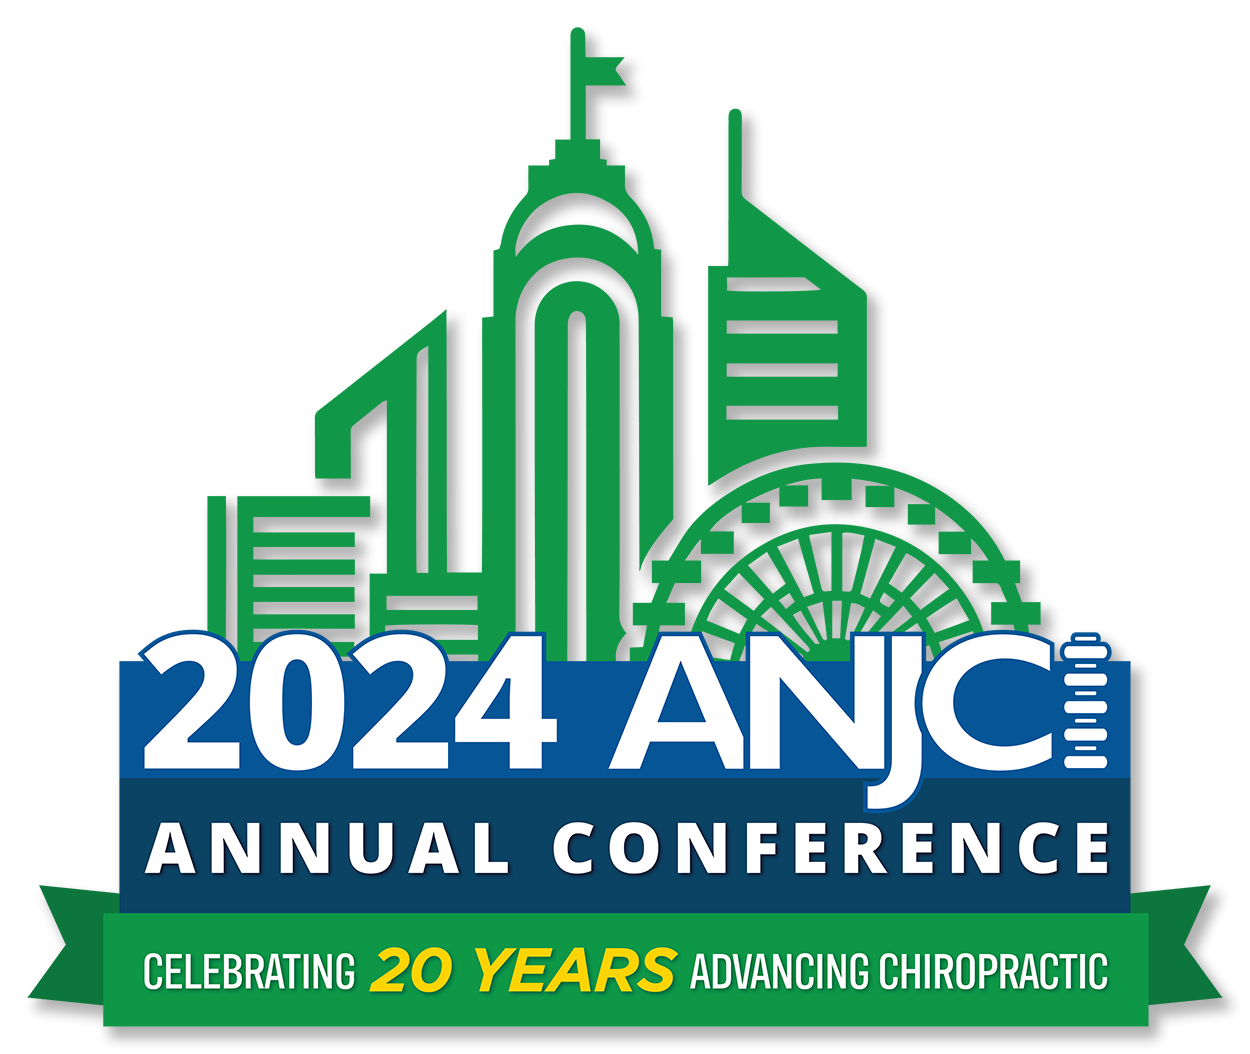 2024 ANJC Annual Conference